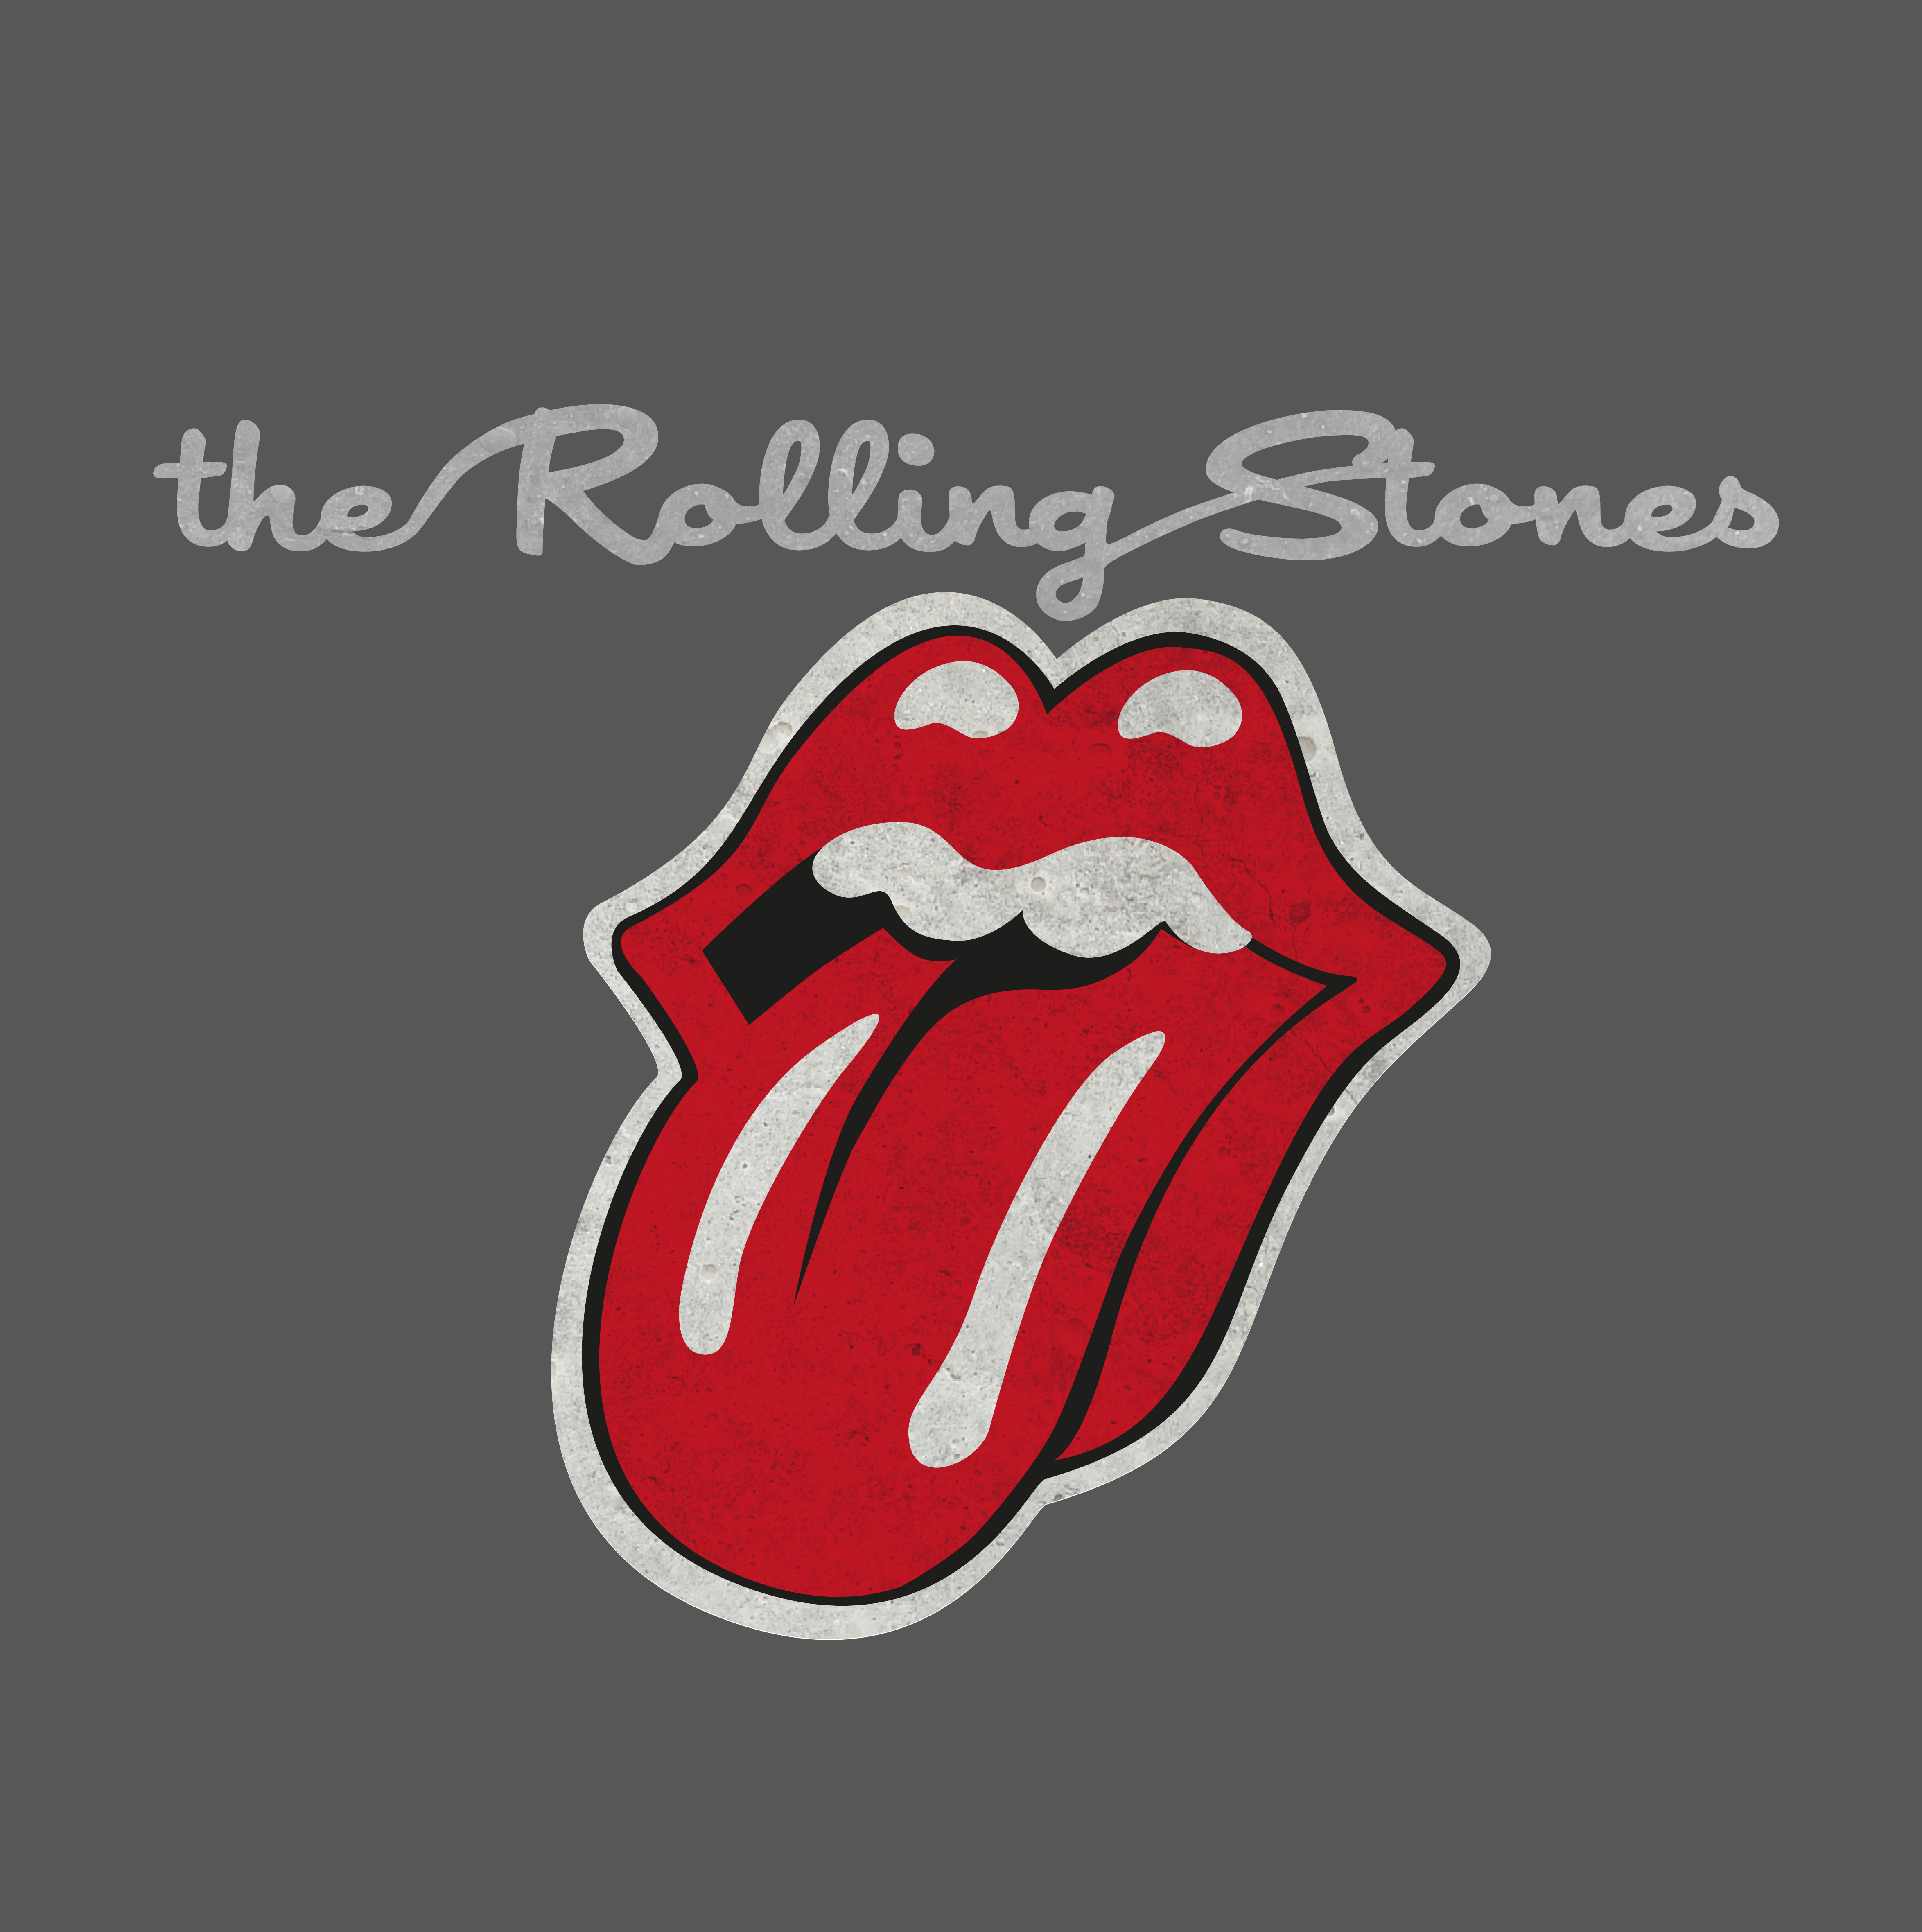 Wallpaper about Like a Rolling Stone